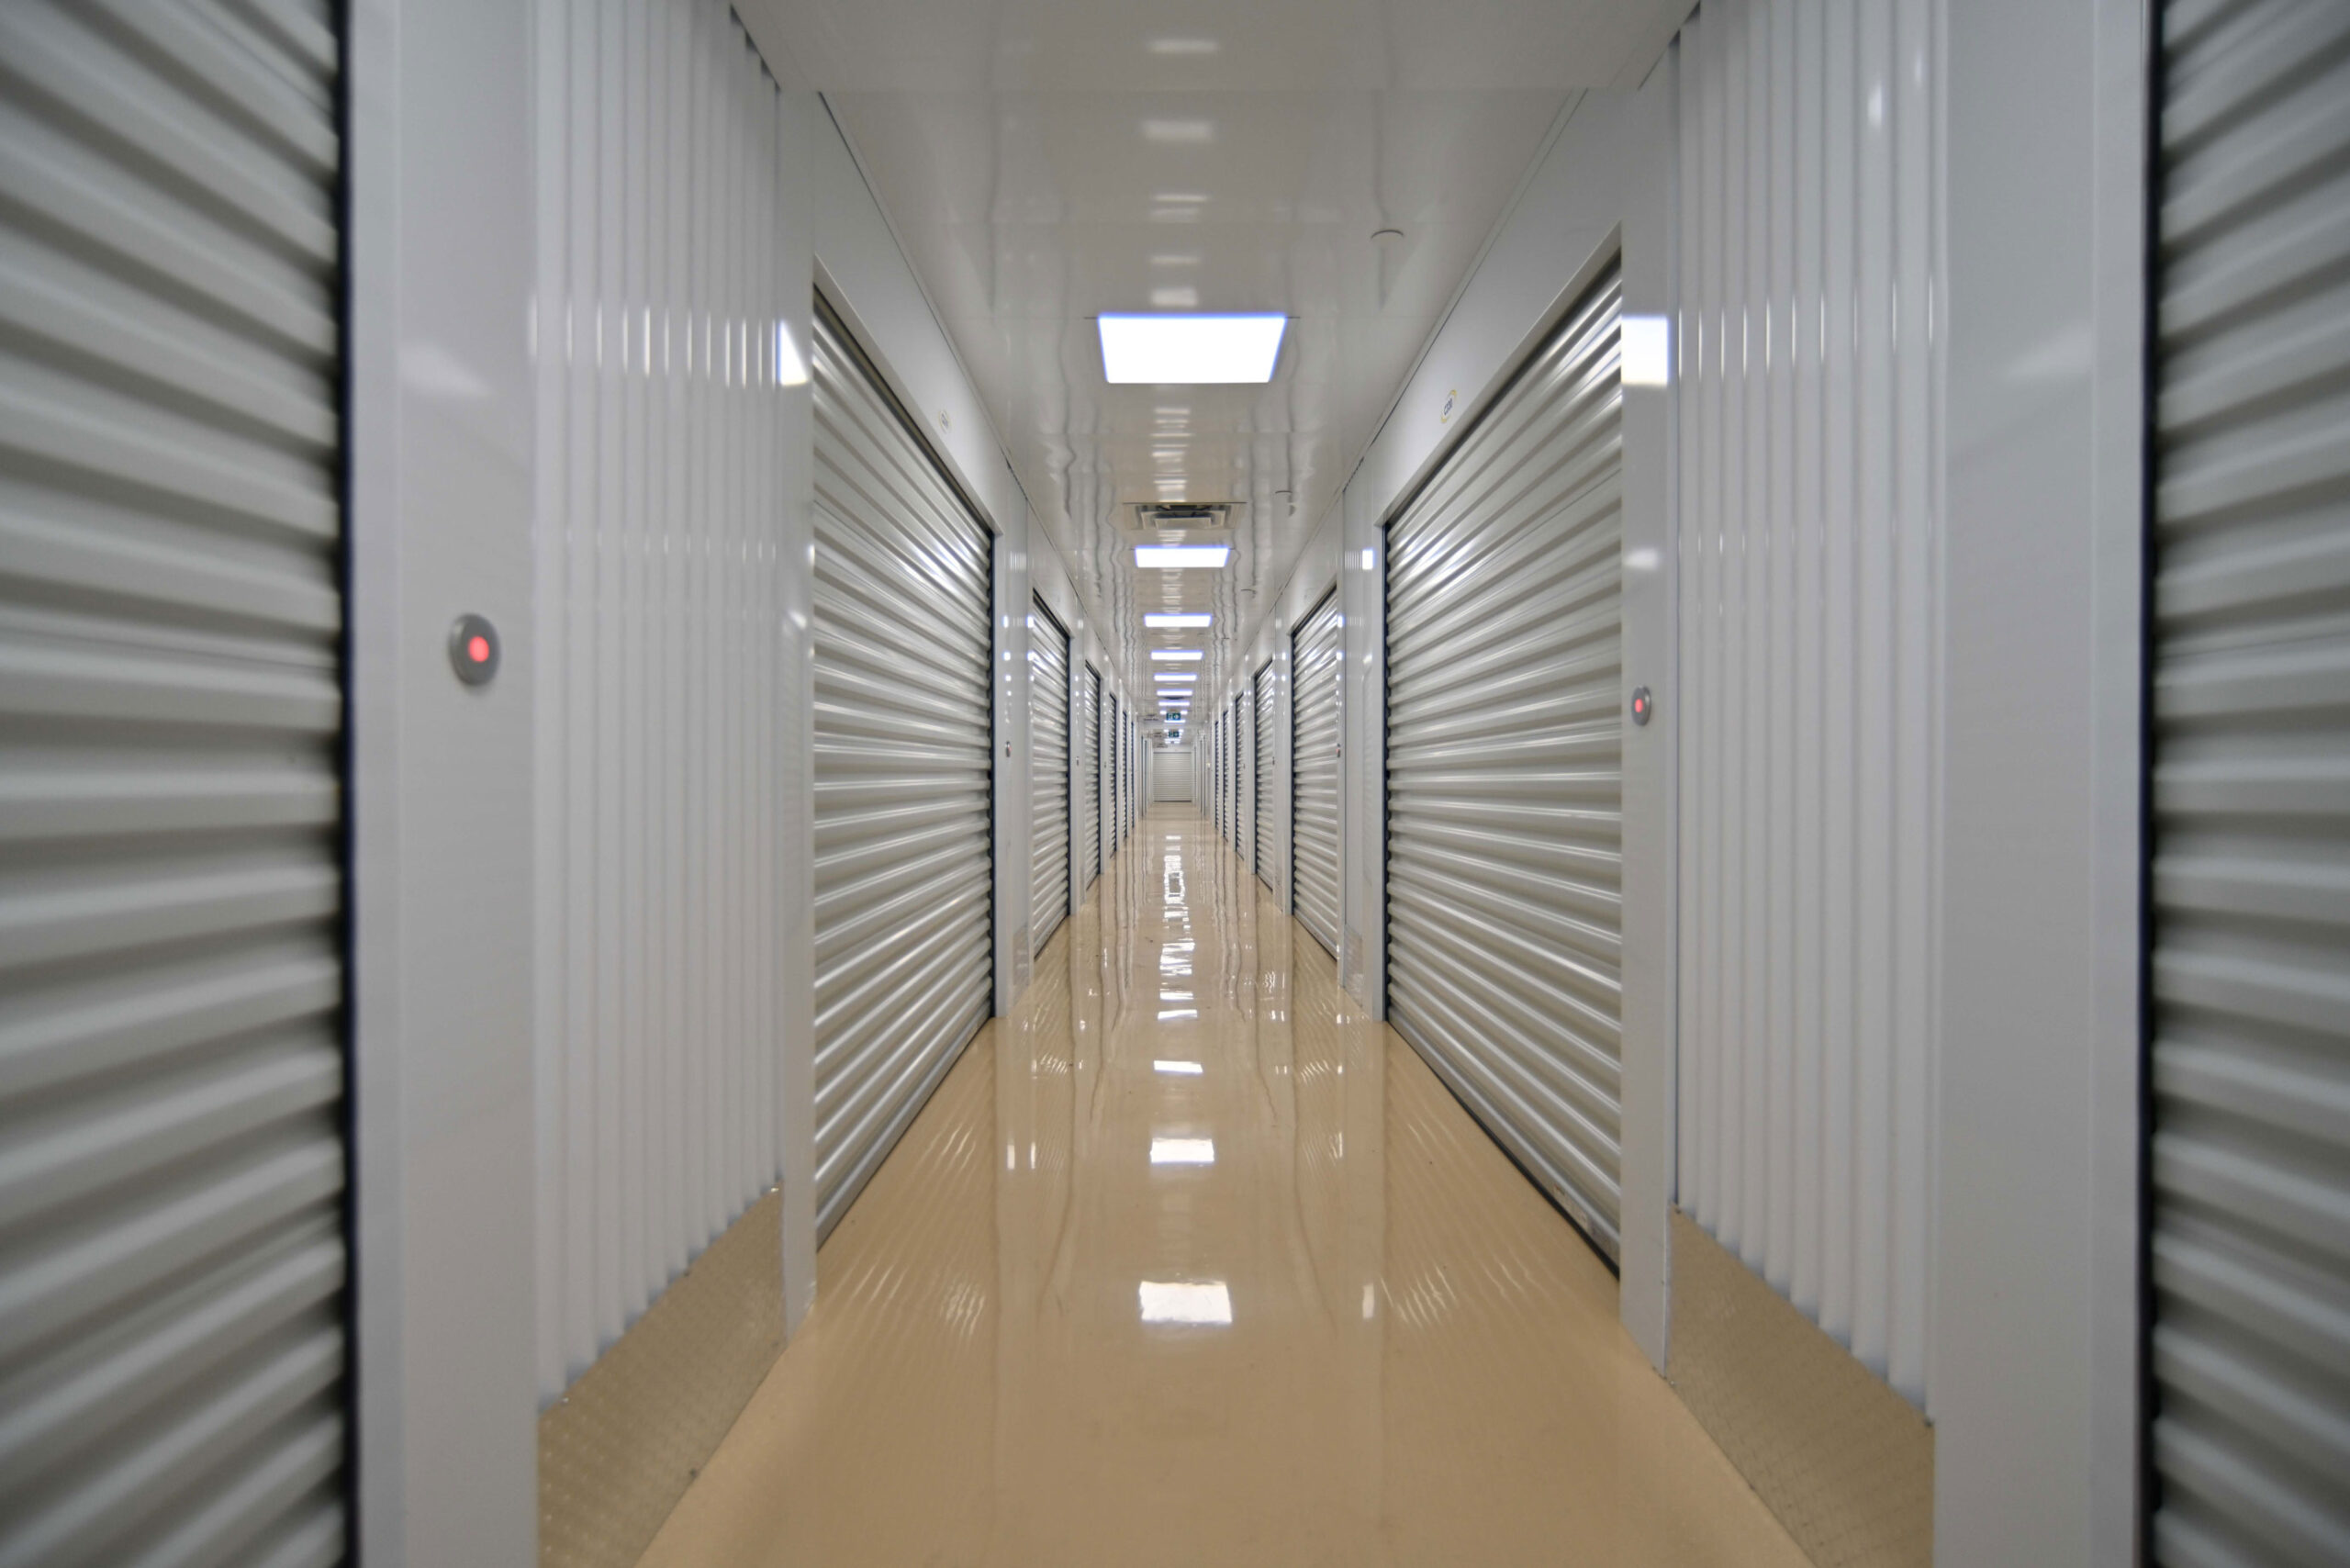 View of a hallway with storage units on either side